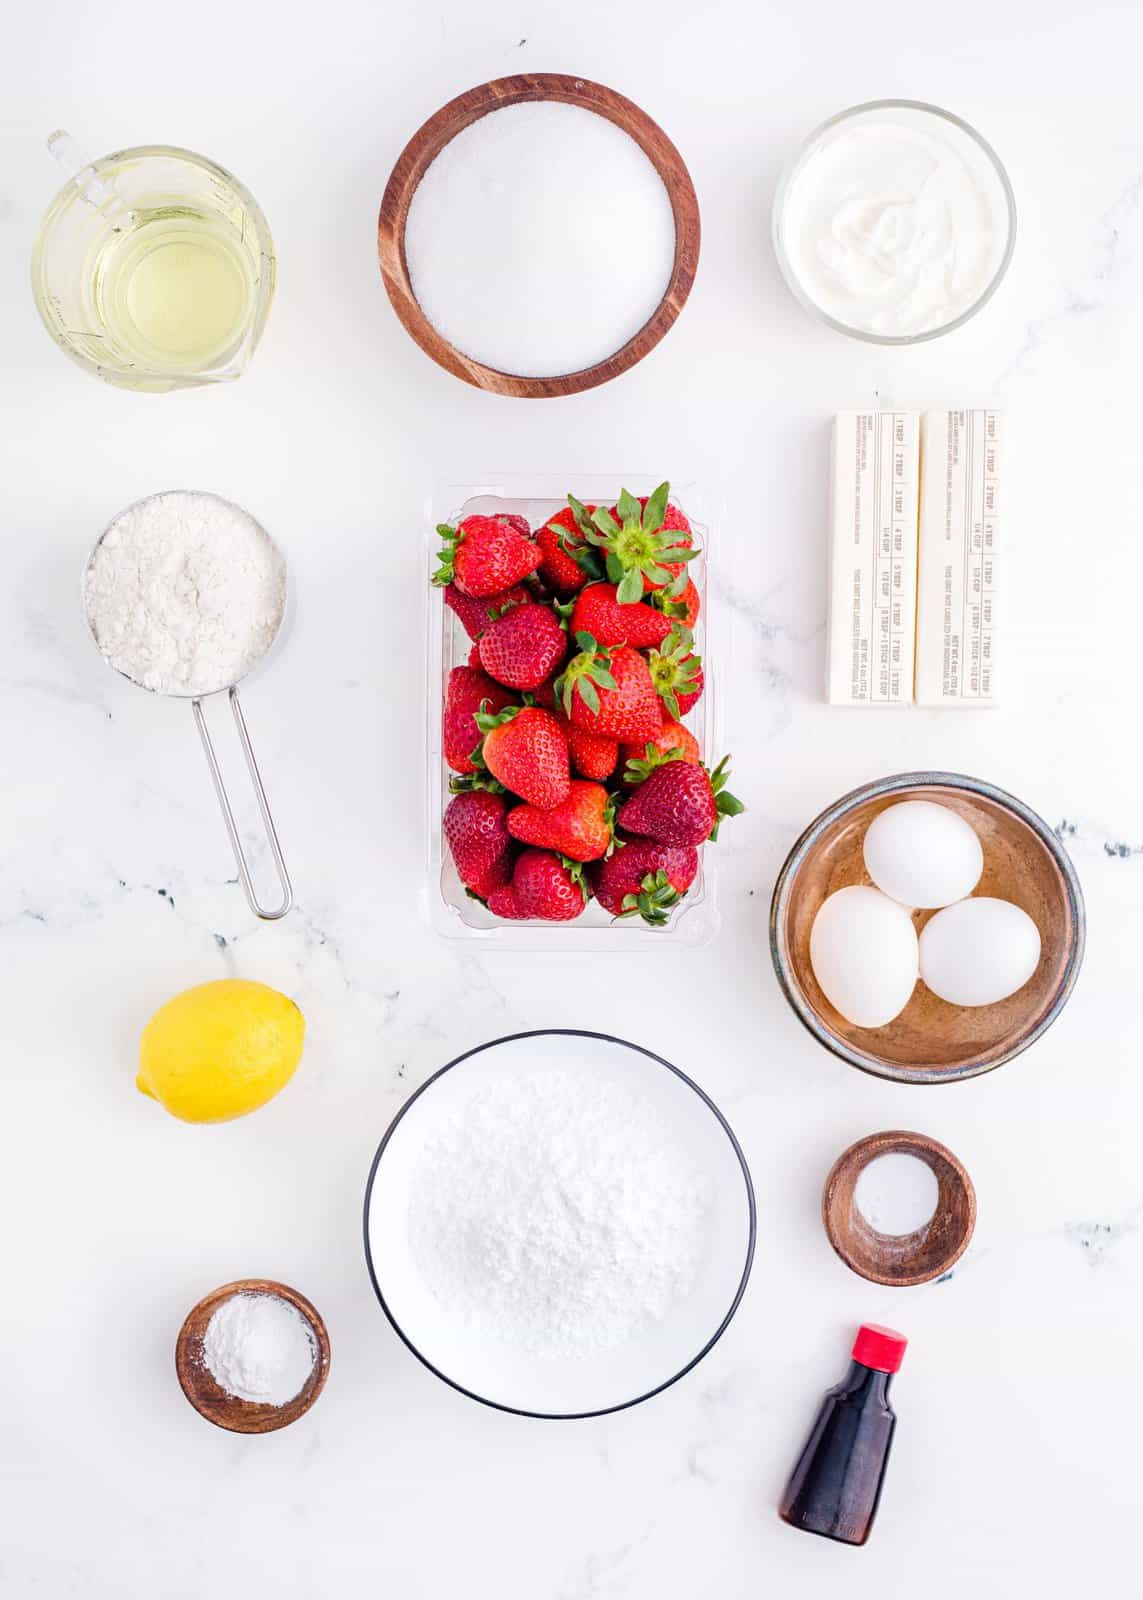 Ingredients needed: strawberries, granulated sugar, lemon juice, all-purpose flour, baking powder, baking soda, salted butter, vegetable oil, vanilla extract, eggs, strawberry reduction, sour cream and powdered sugar.